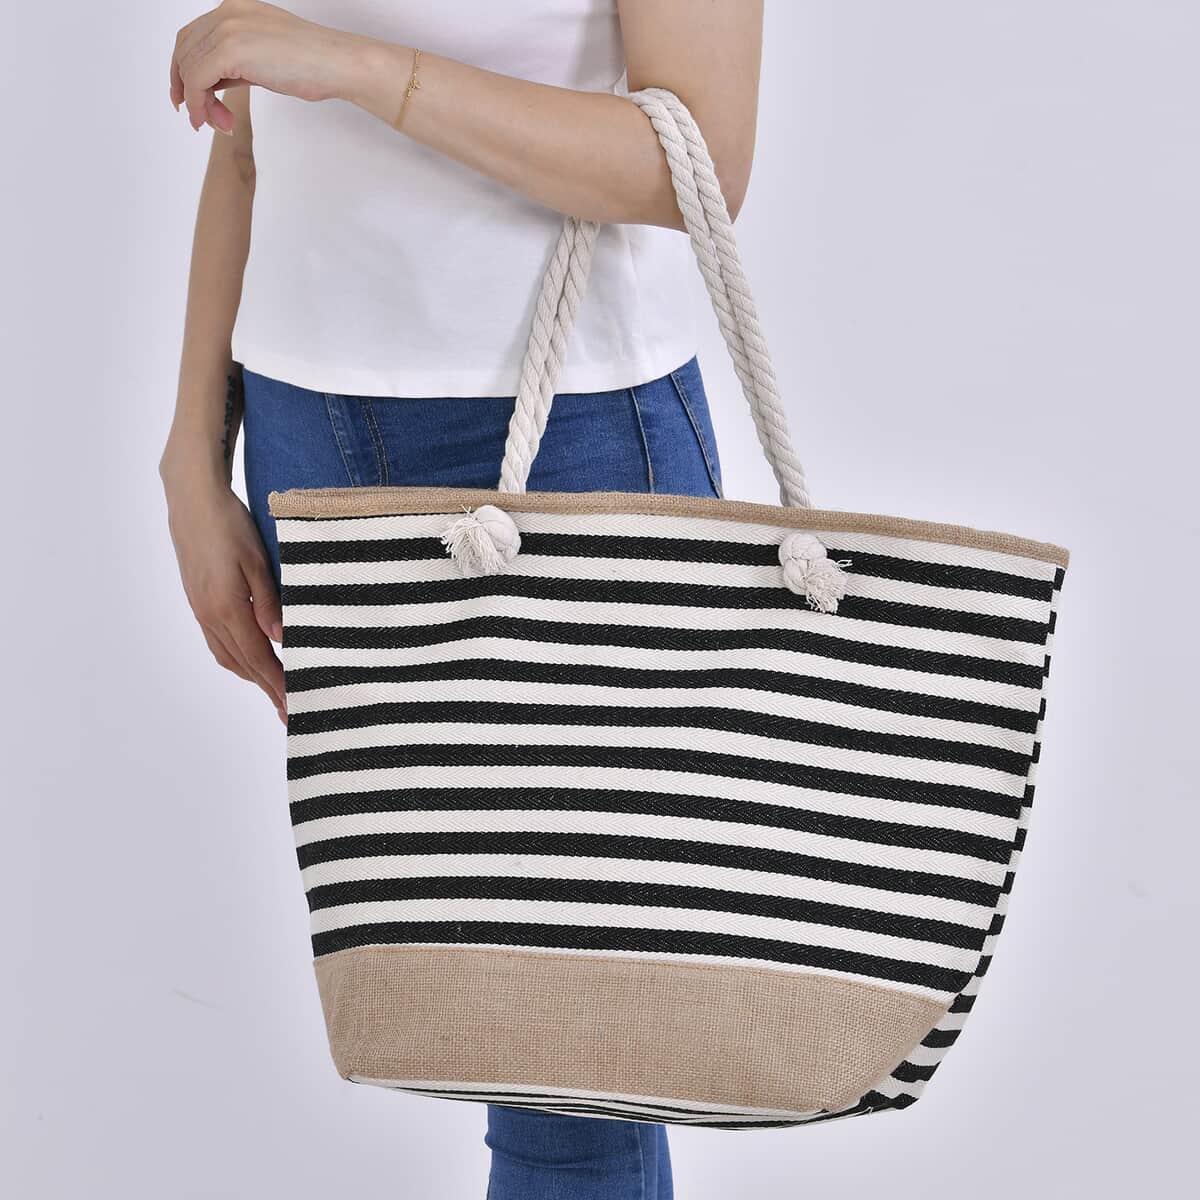 Black and White Stripes Polyester and Jute Tote Bag (12"x8.7"x15") image number 2